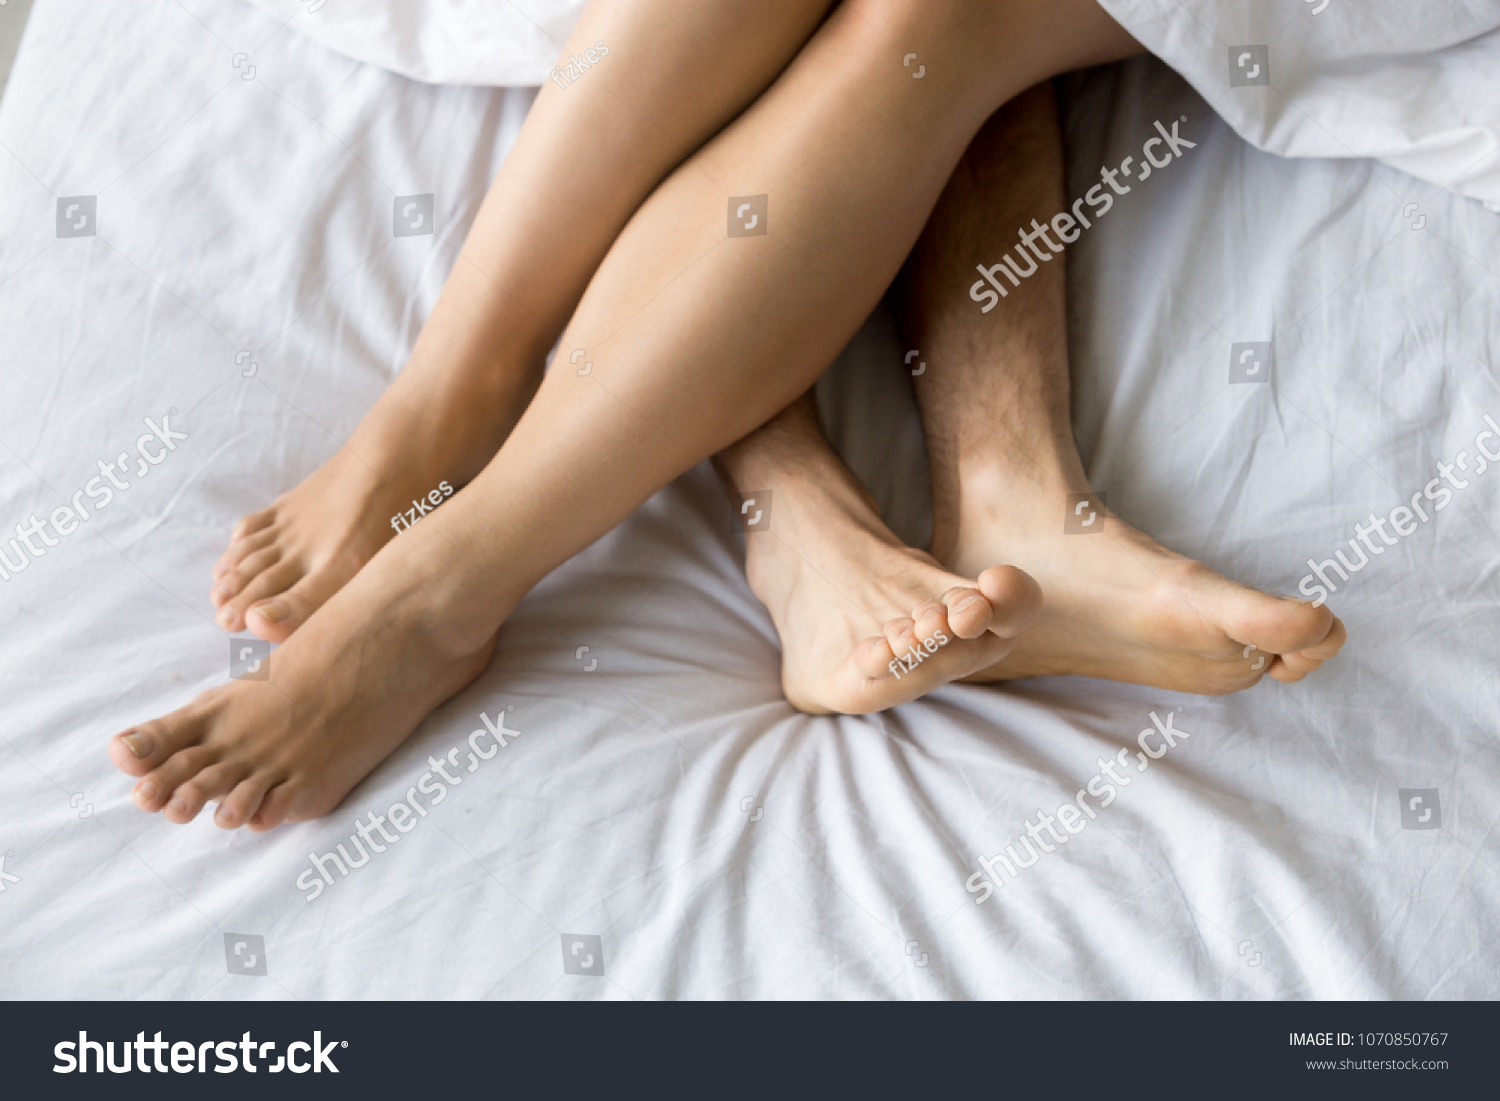 Taming a sexy pair of feet